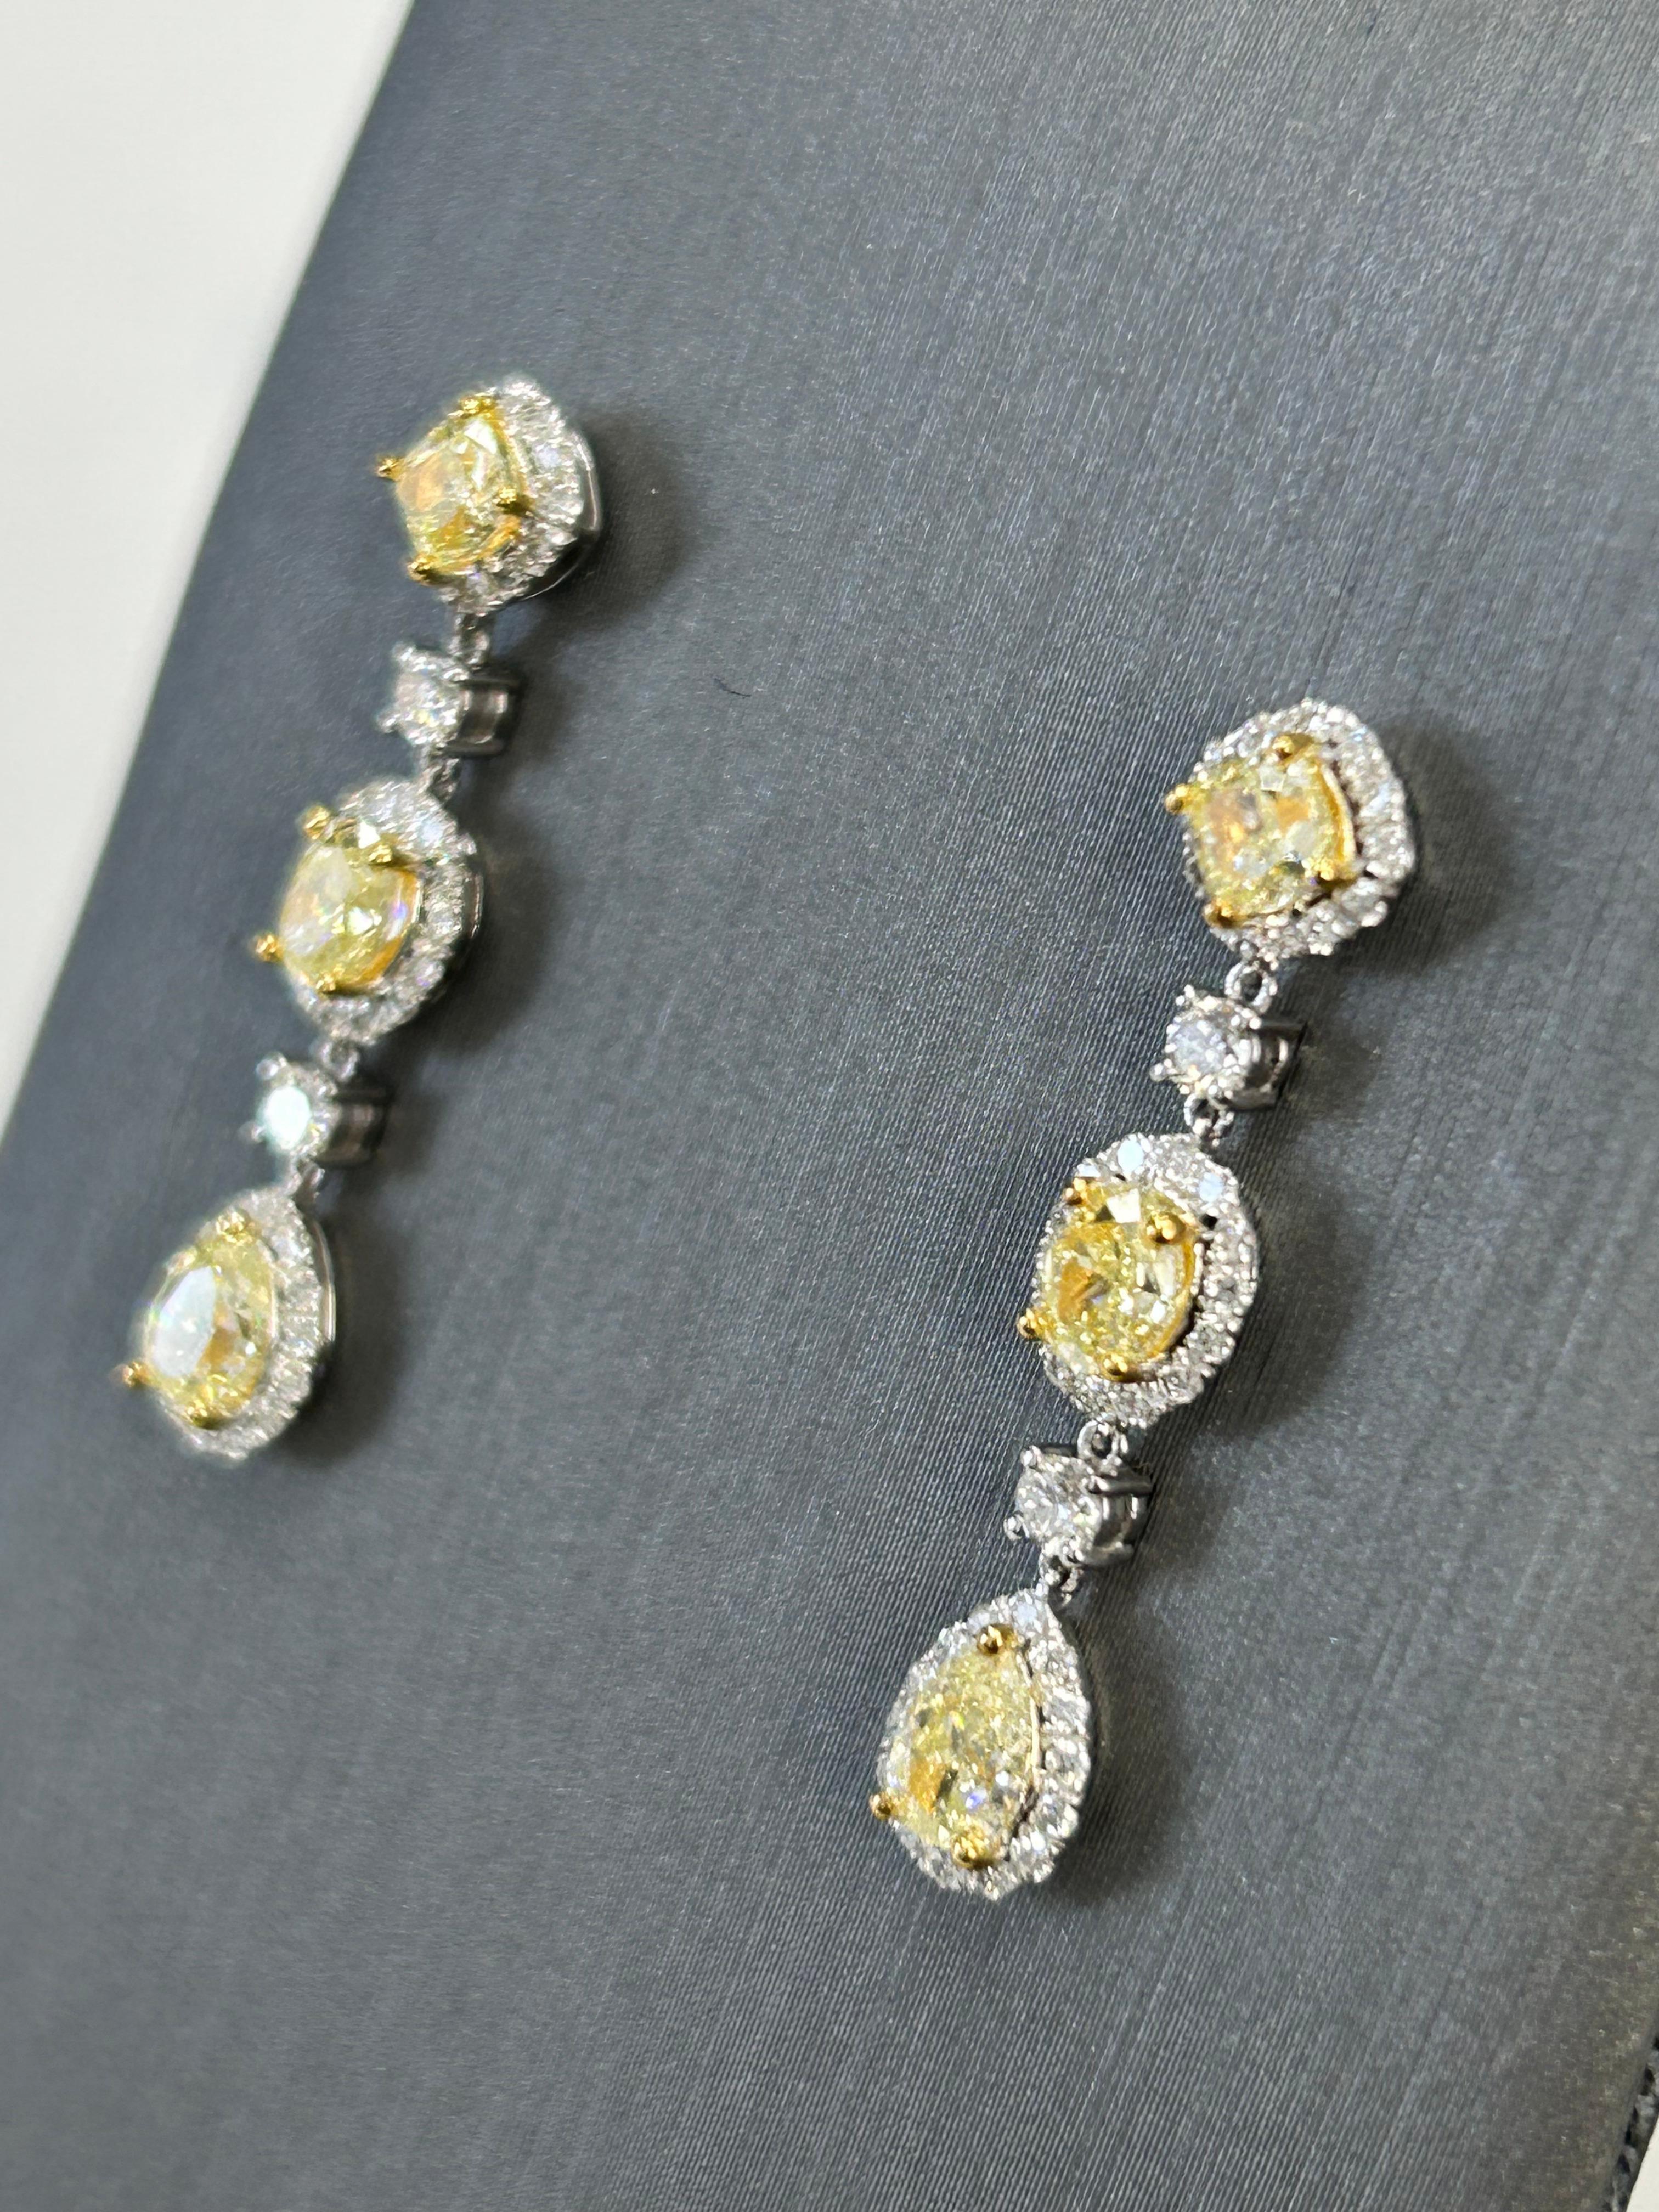 These Luscious Lemon™️ Dangle earrings have 3 different shapes to them: Cushion, Oval, and Pear with a gorgeous white melee halo to elevate the Lemon Yellow goodness. The earrings are 2.00 cts and are in 14K WG/YG. These are for $6800. 